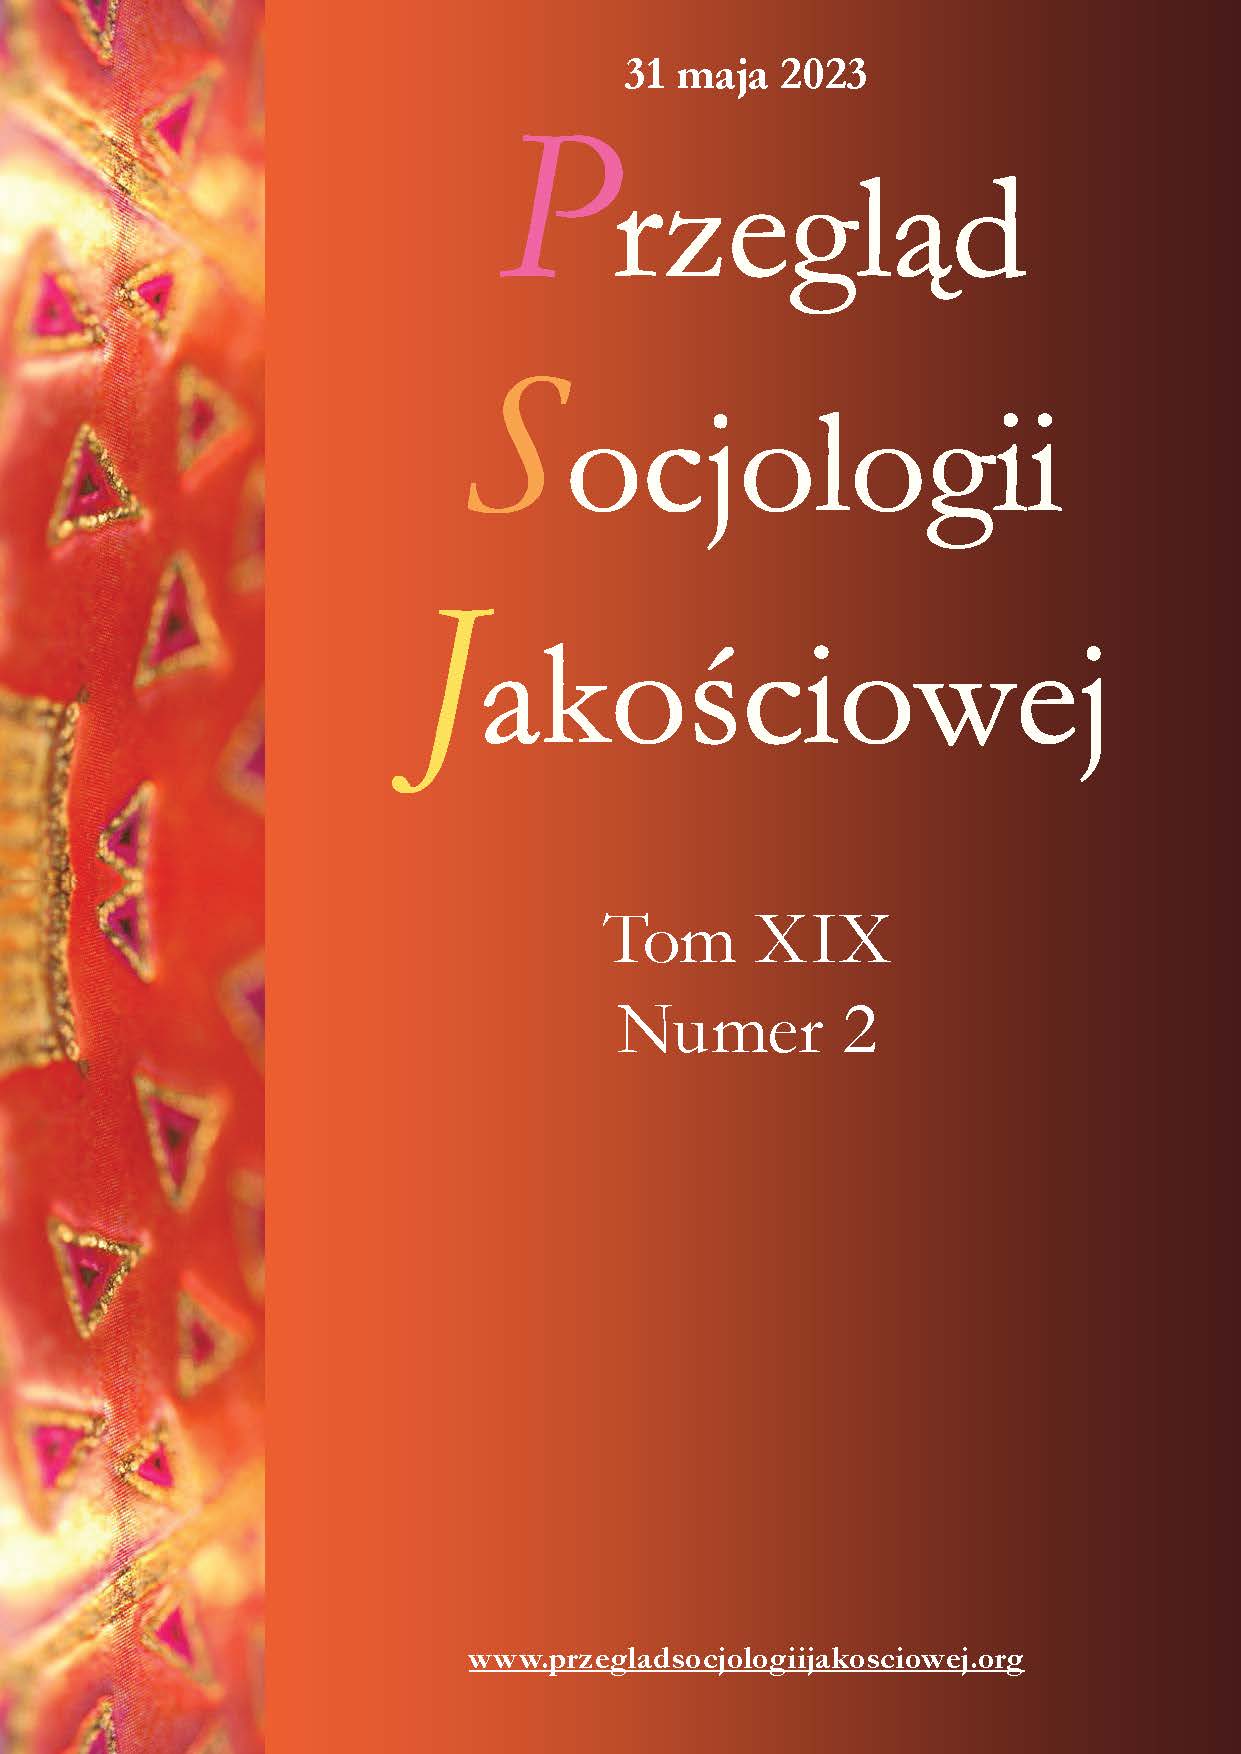 Results of the 13th edition of the photography competition "Przegląd Sociologii Jakościowej" Cover Image